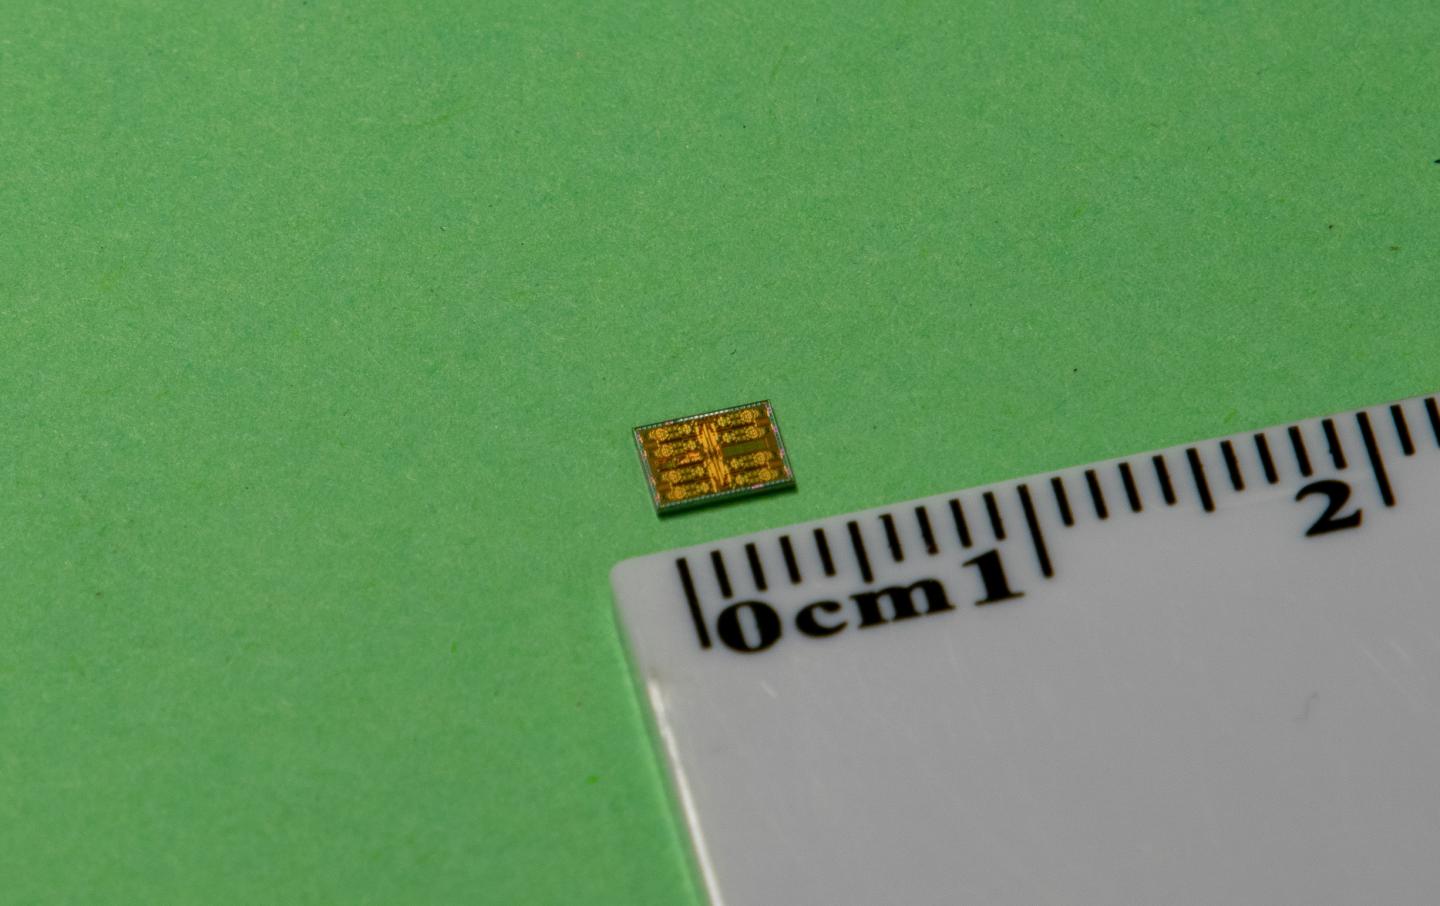 The New Transceiver Measures Only 3mm X 4mm